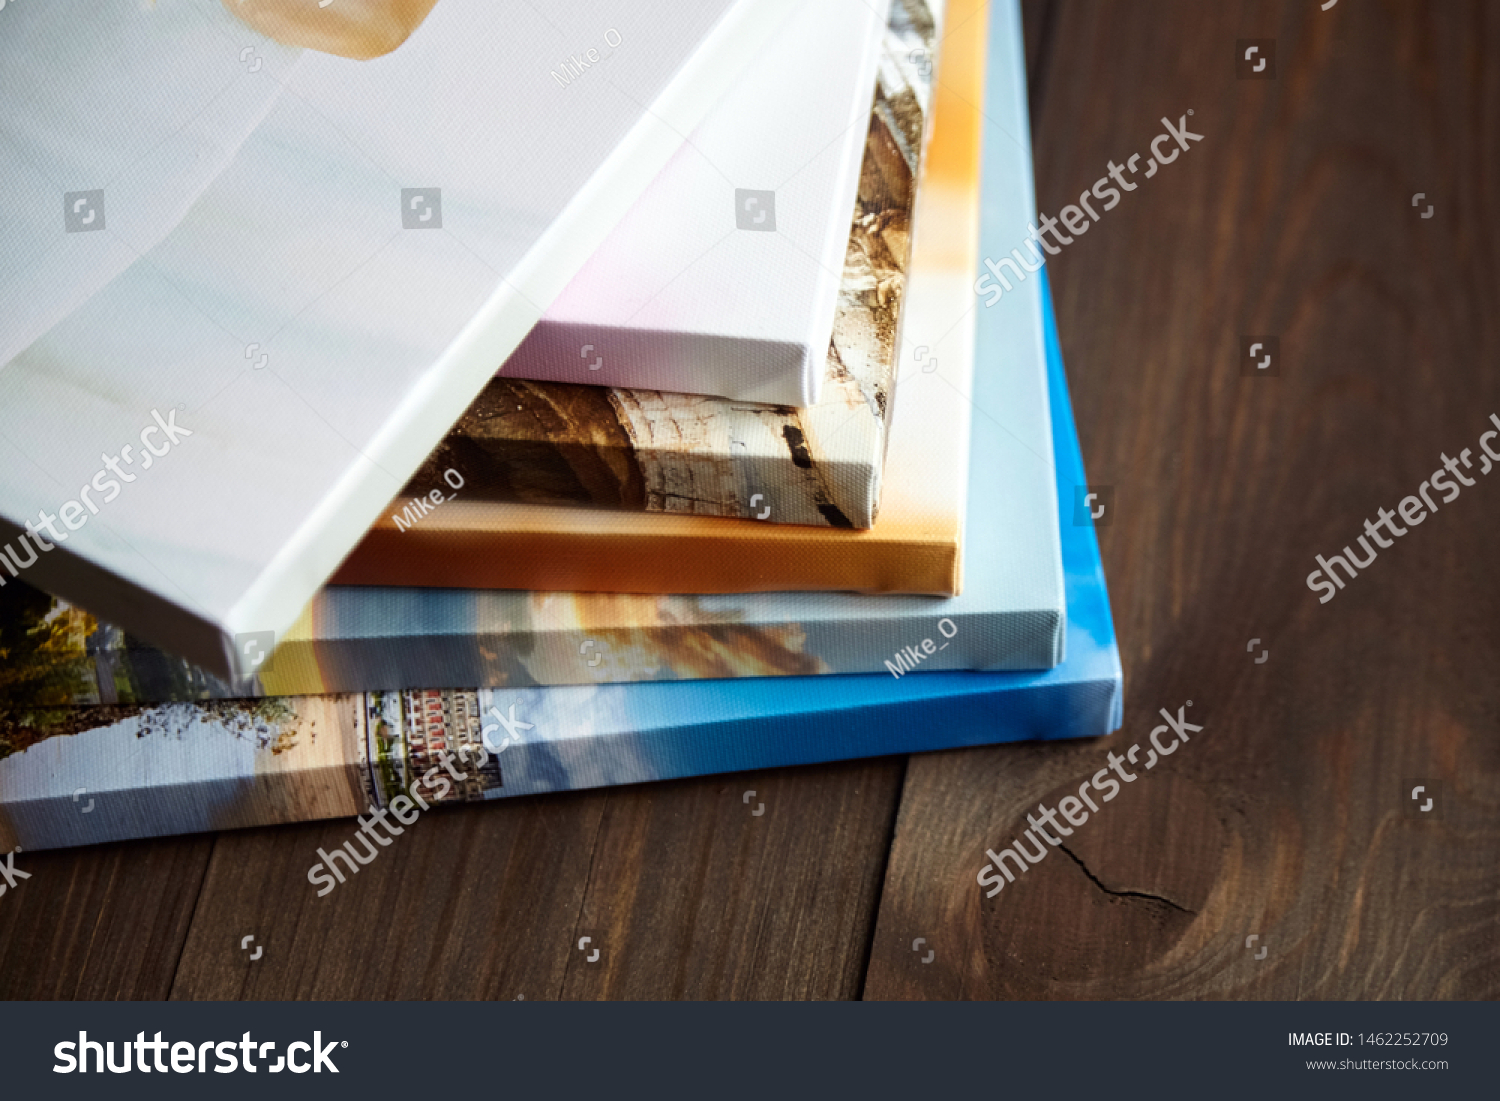 Photography canvas prints. Stacked colorful photos with gallery wrapping method of canvas stretching on stretcher bar, lateral side #1462252709